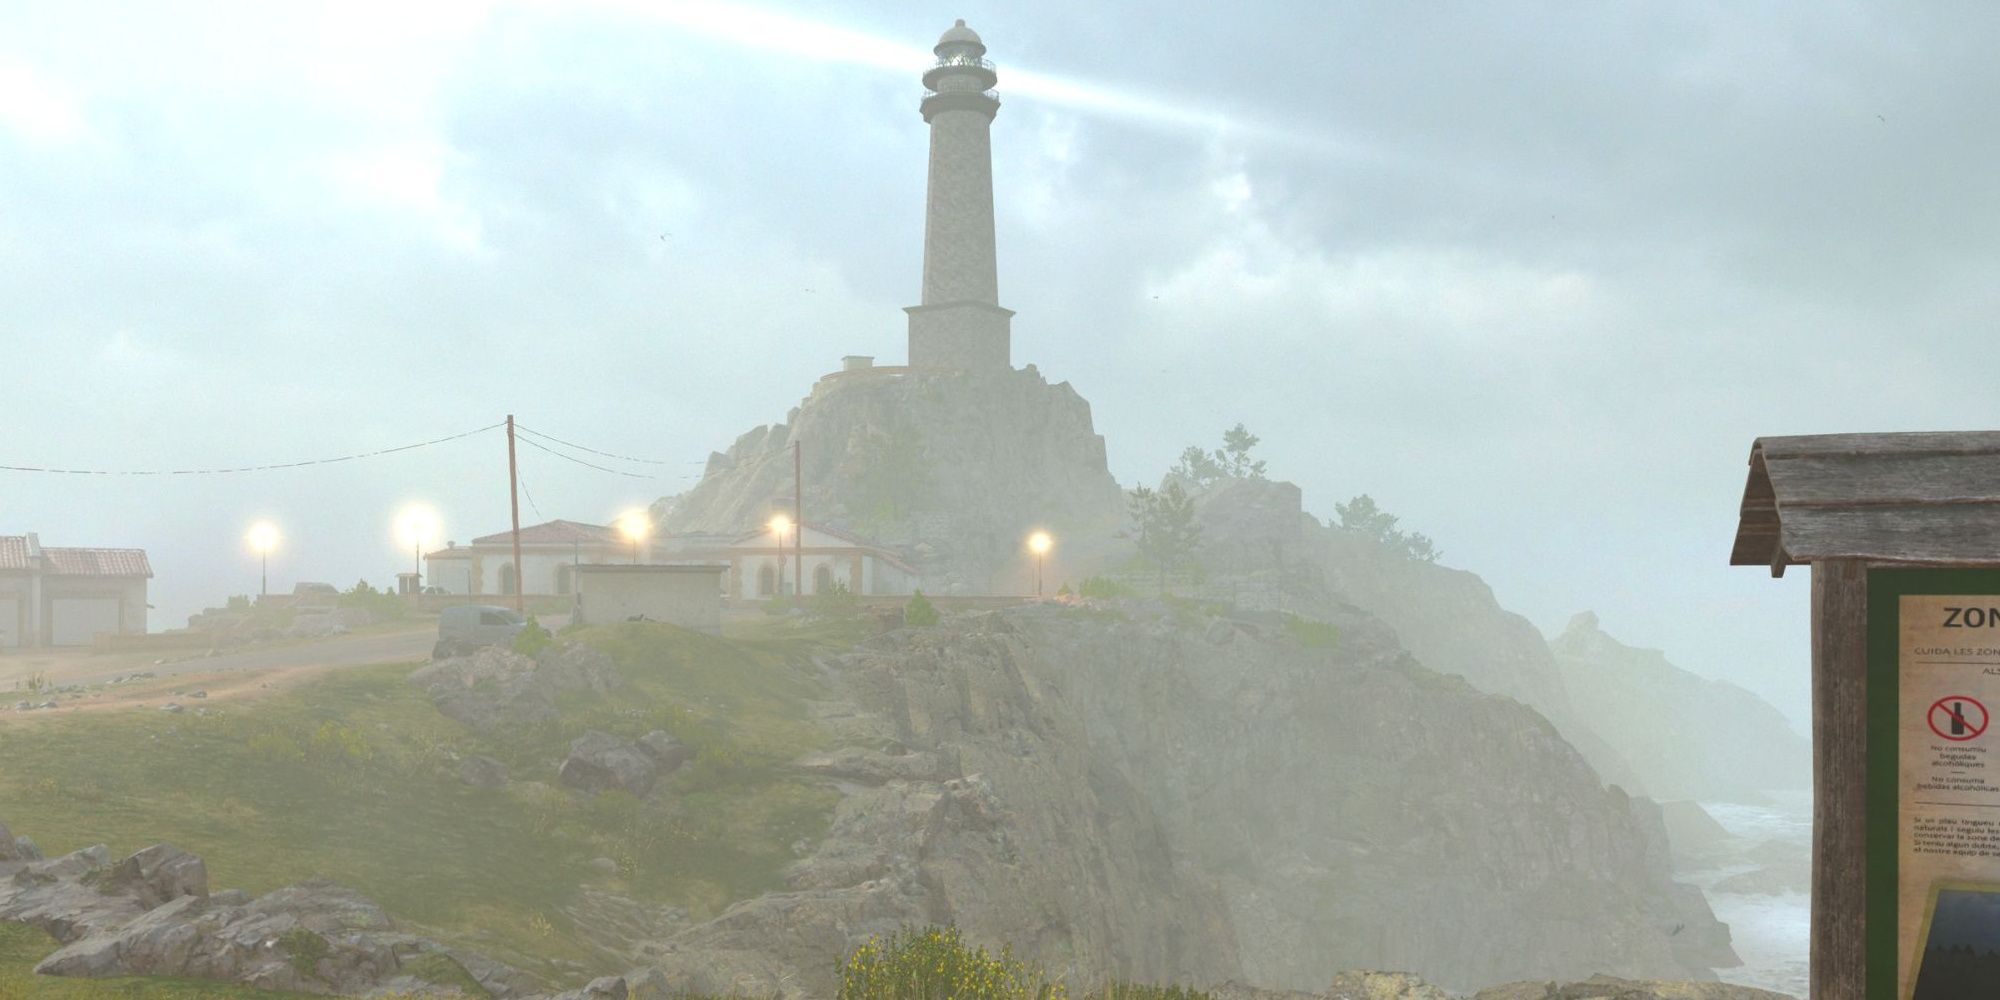 The lighthouse location in the Recon By Fire mission in the new Call of Duty: Modern Warfare 2.